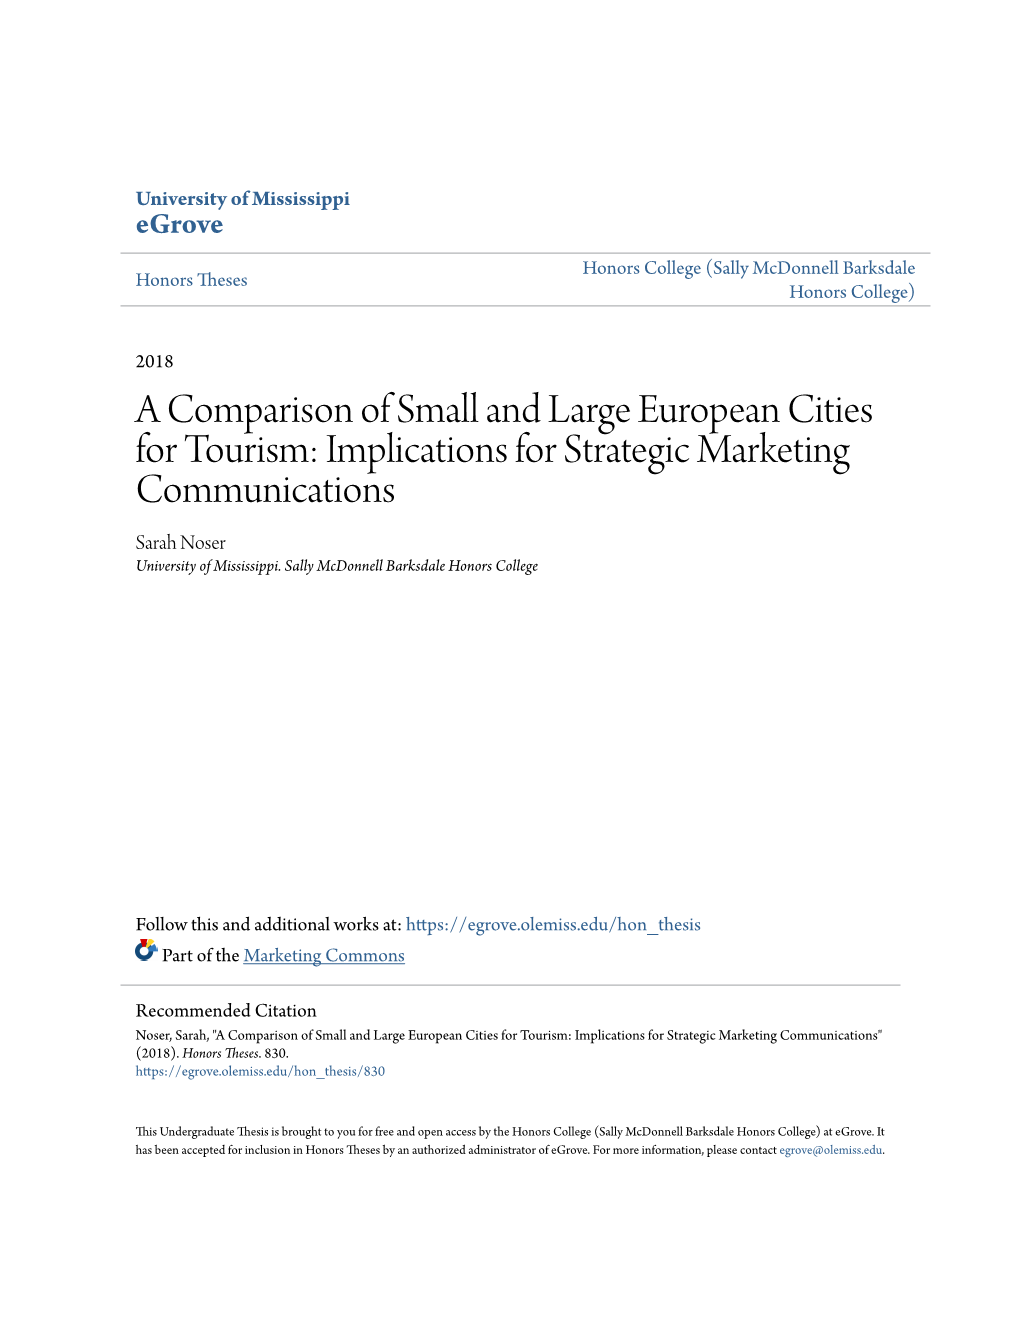 A Comparison of Small and Large European Cities for Tourism: Implications for Strategic Marketing Communications Sarah Noser University of Mississippi